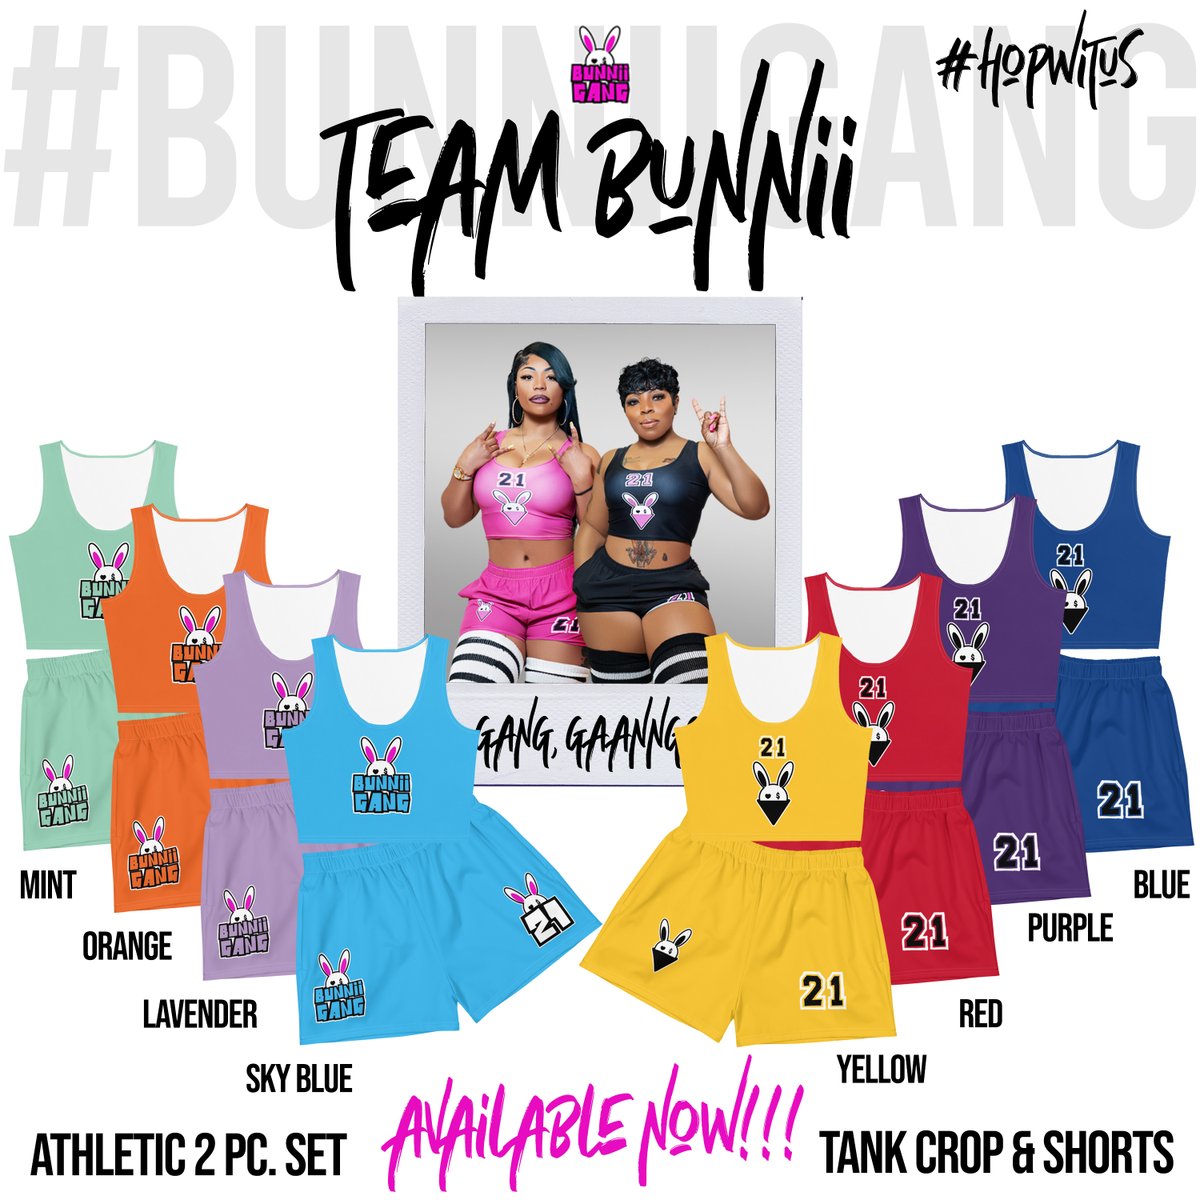 NEW TEAM BUNNII SETS AVAILABLE NOW WITH 4 NEW COLORS!!! SHOP WIT US TO #HOPWITUS #BUNNIIGANG bunniigang.com/collections/bu…